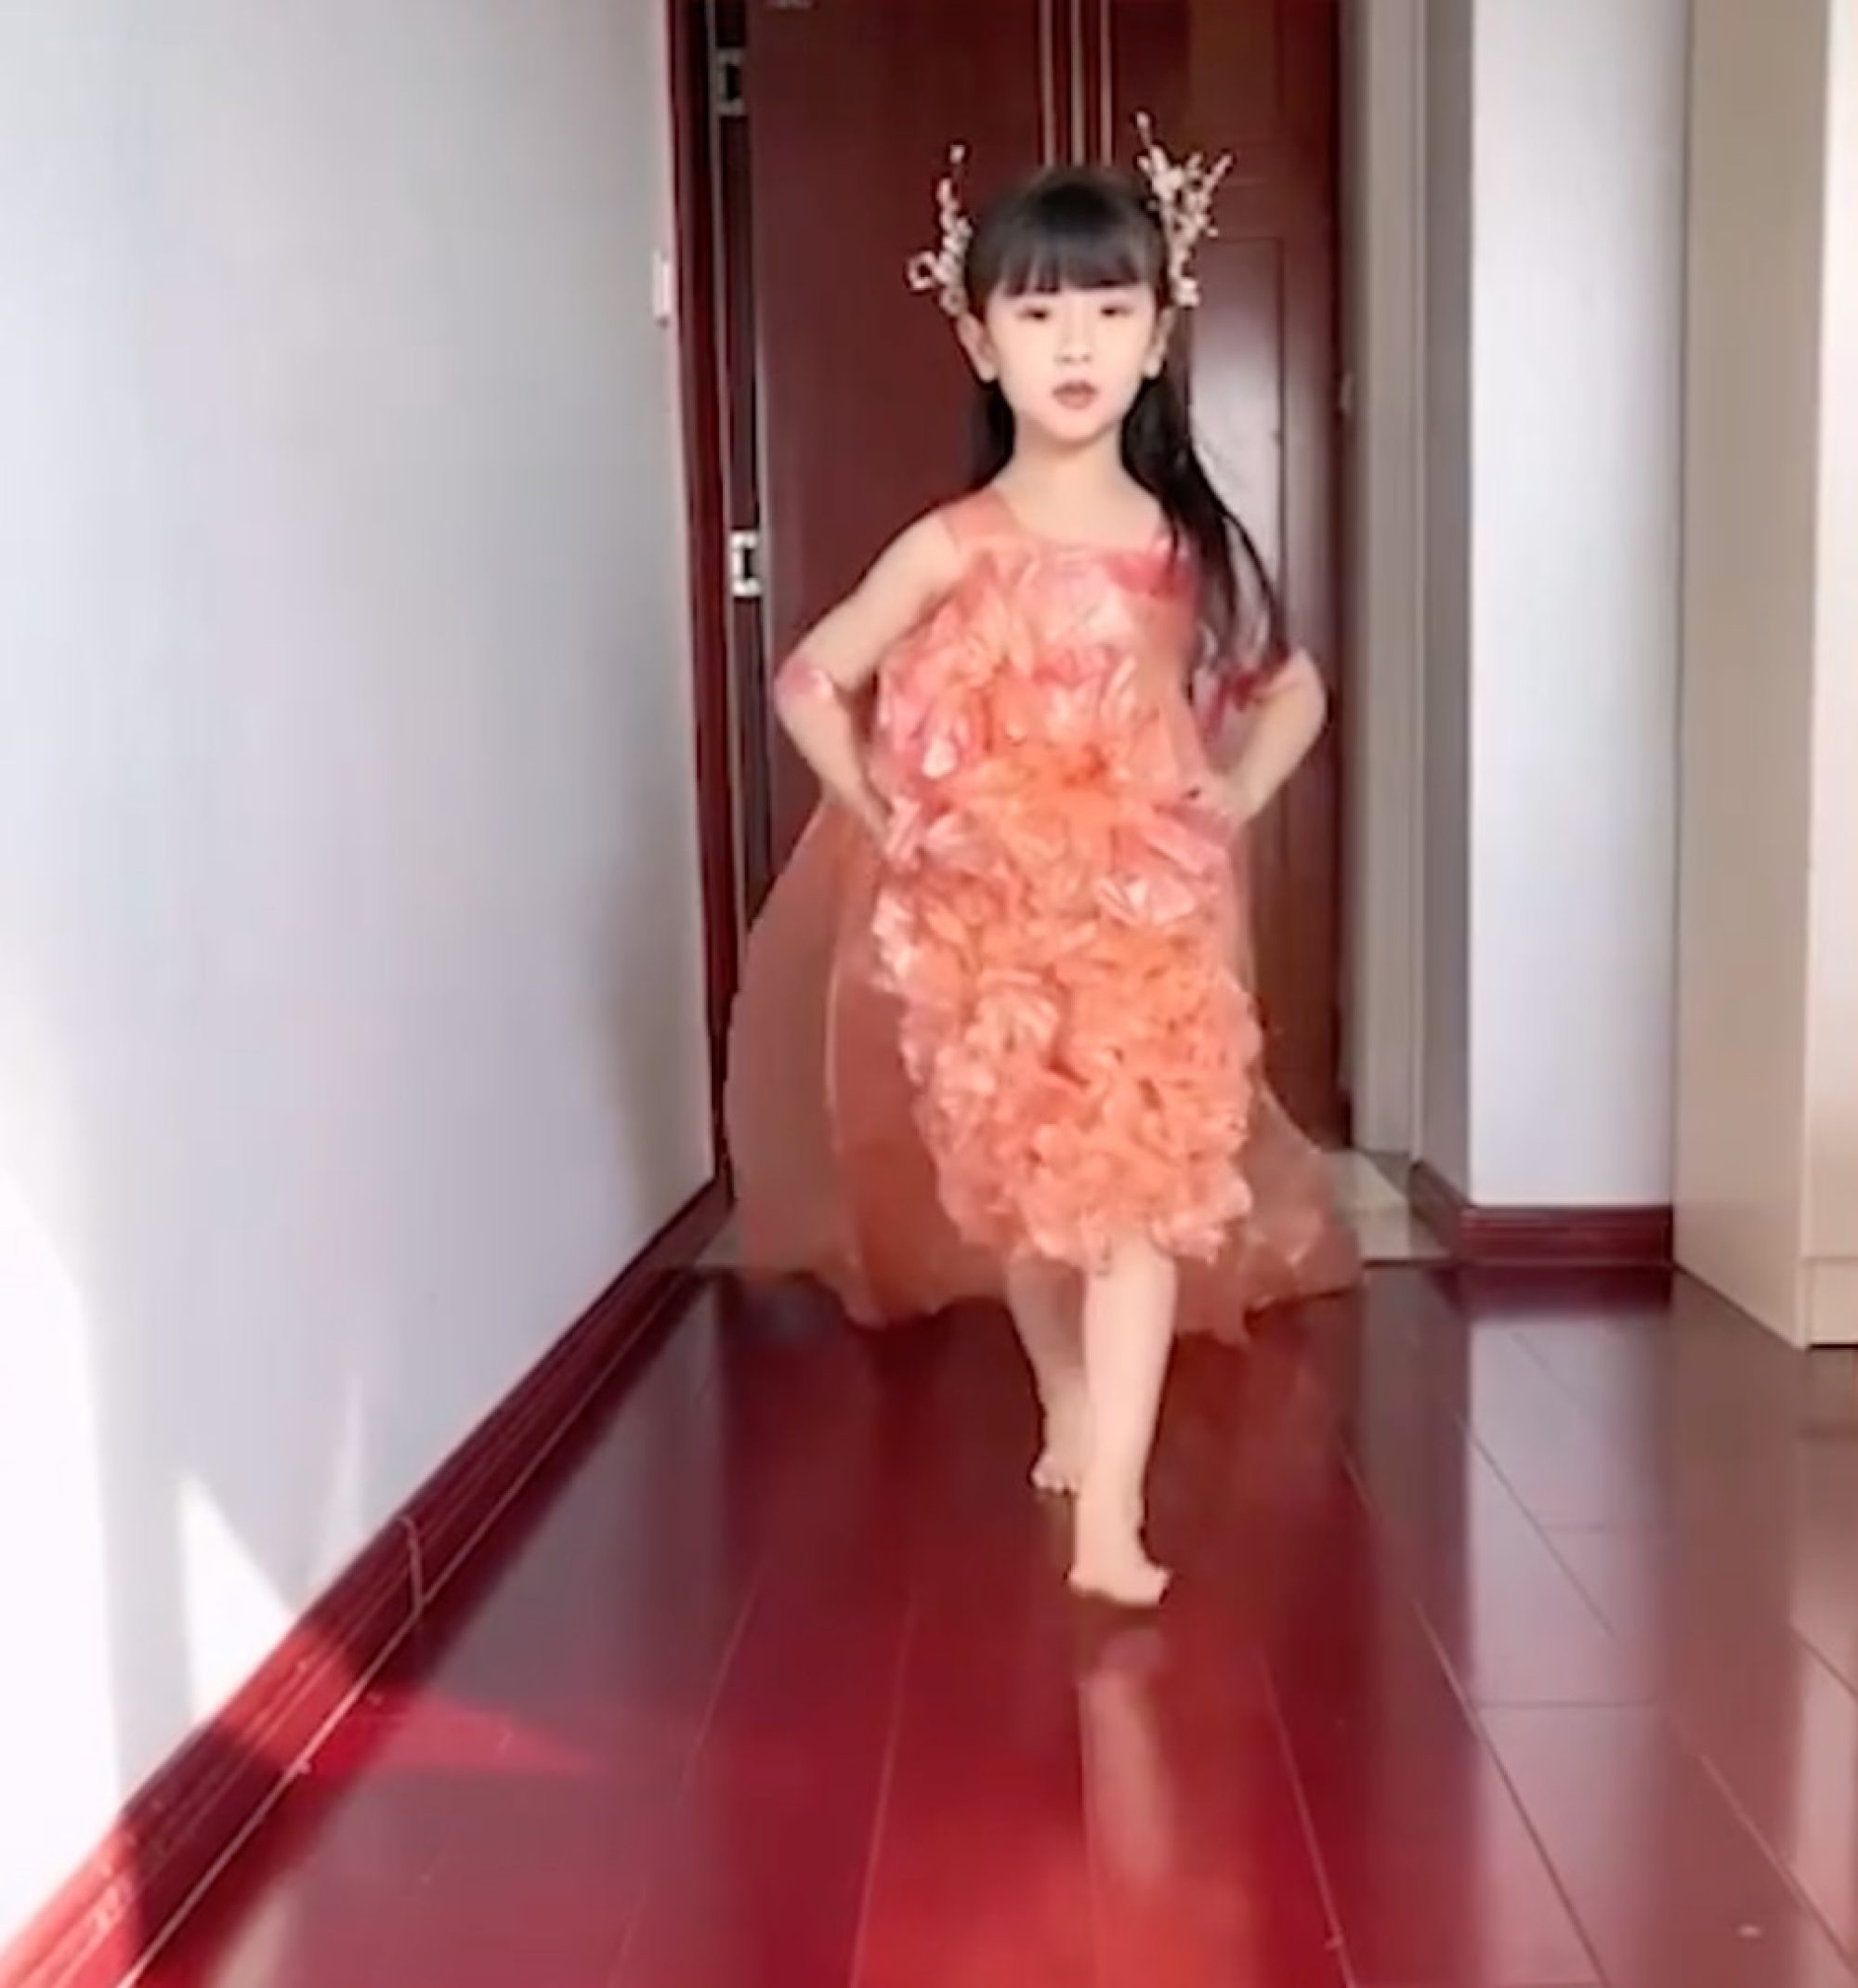 Study Buddy (Explorer): Mother in China transforms plastic bags into 'high  fashion' for daughter's catwalk at home - YP